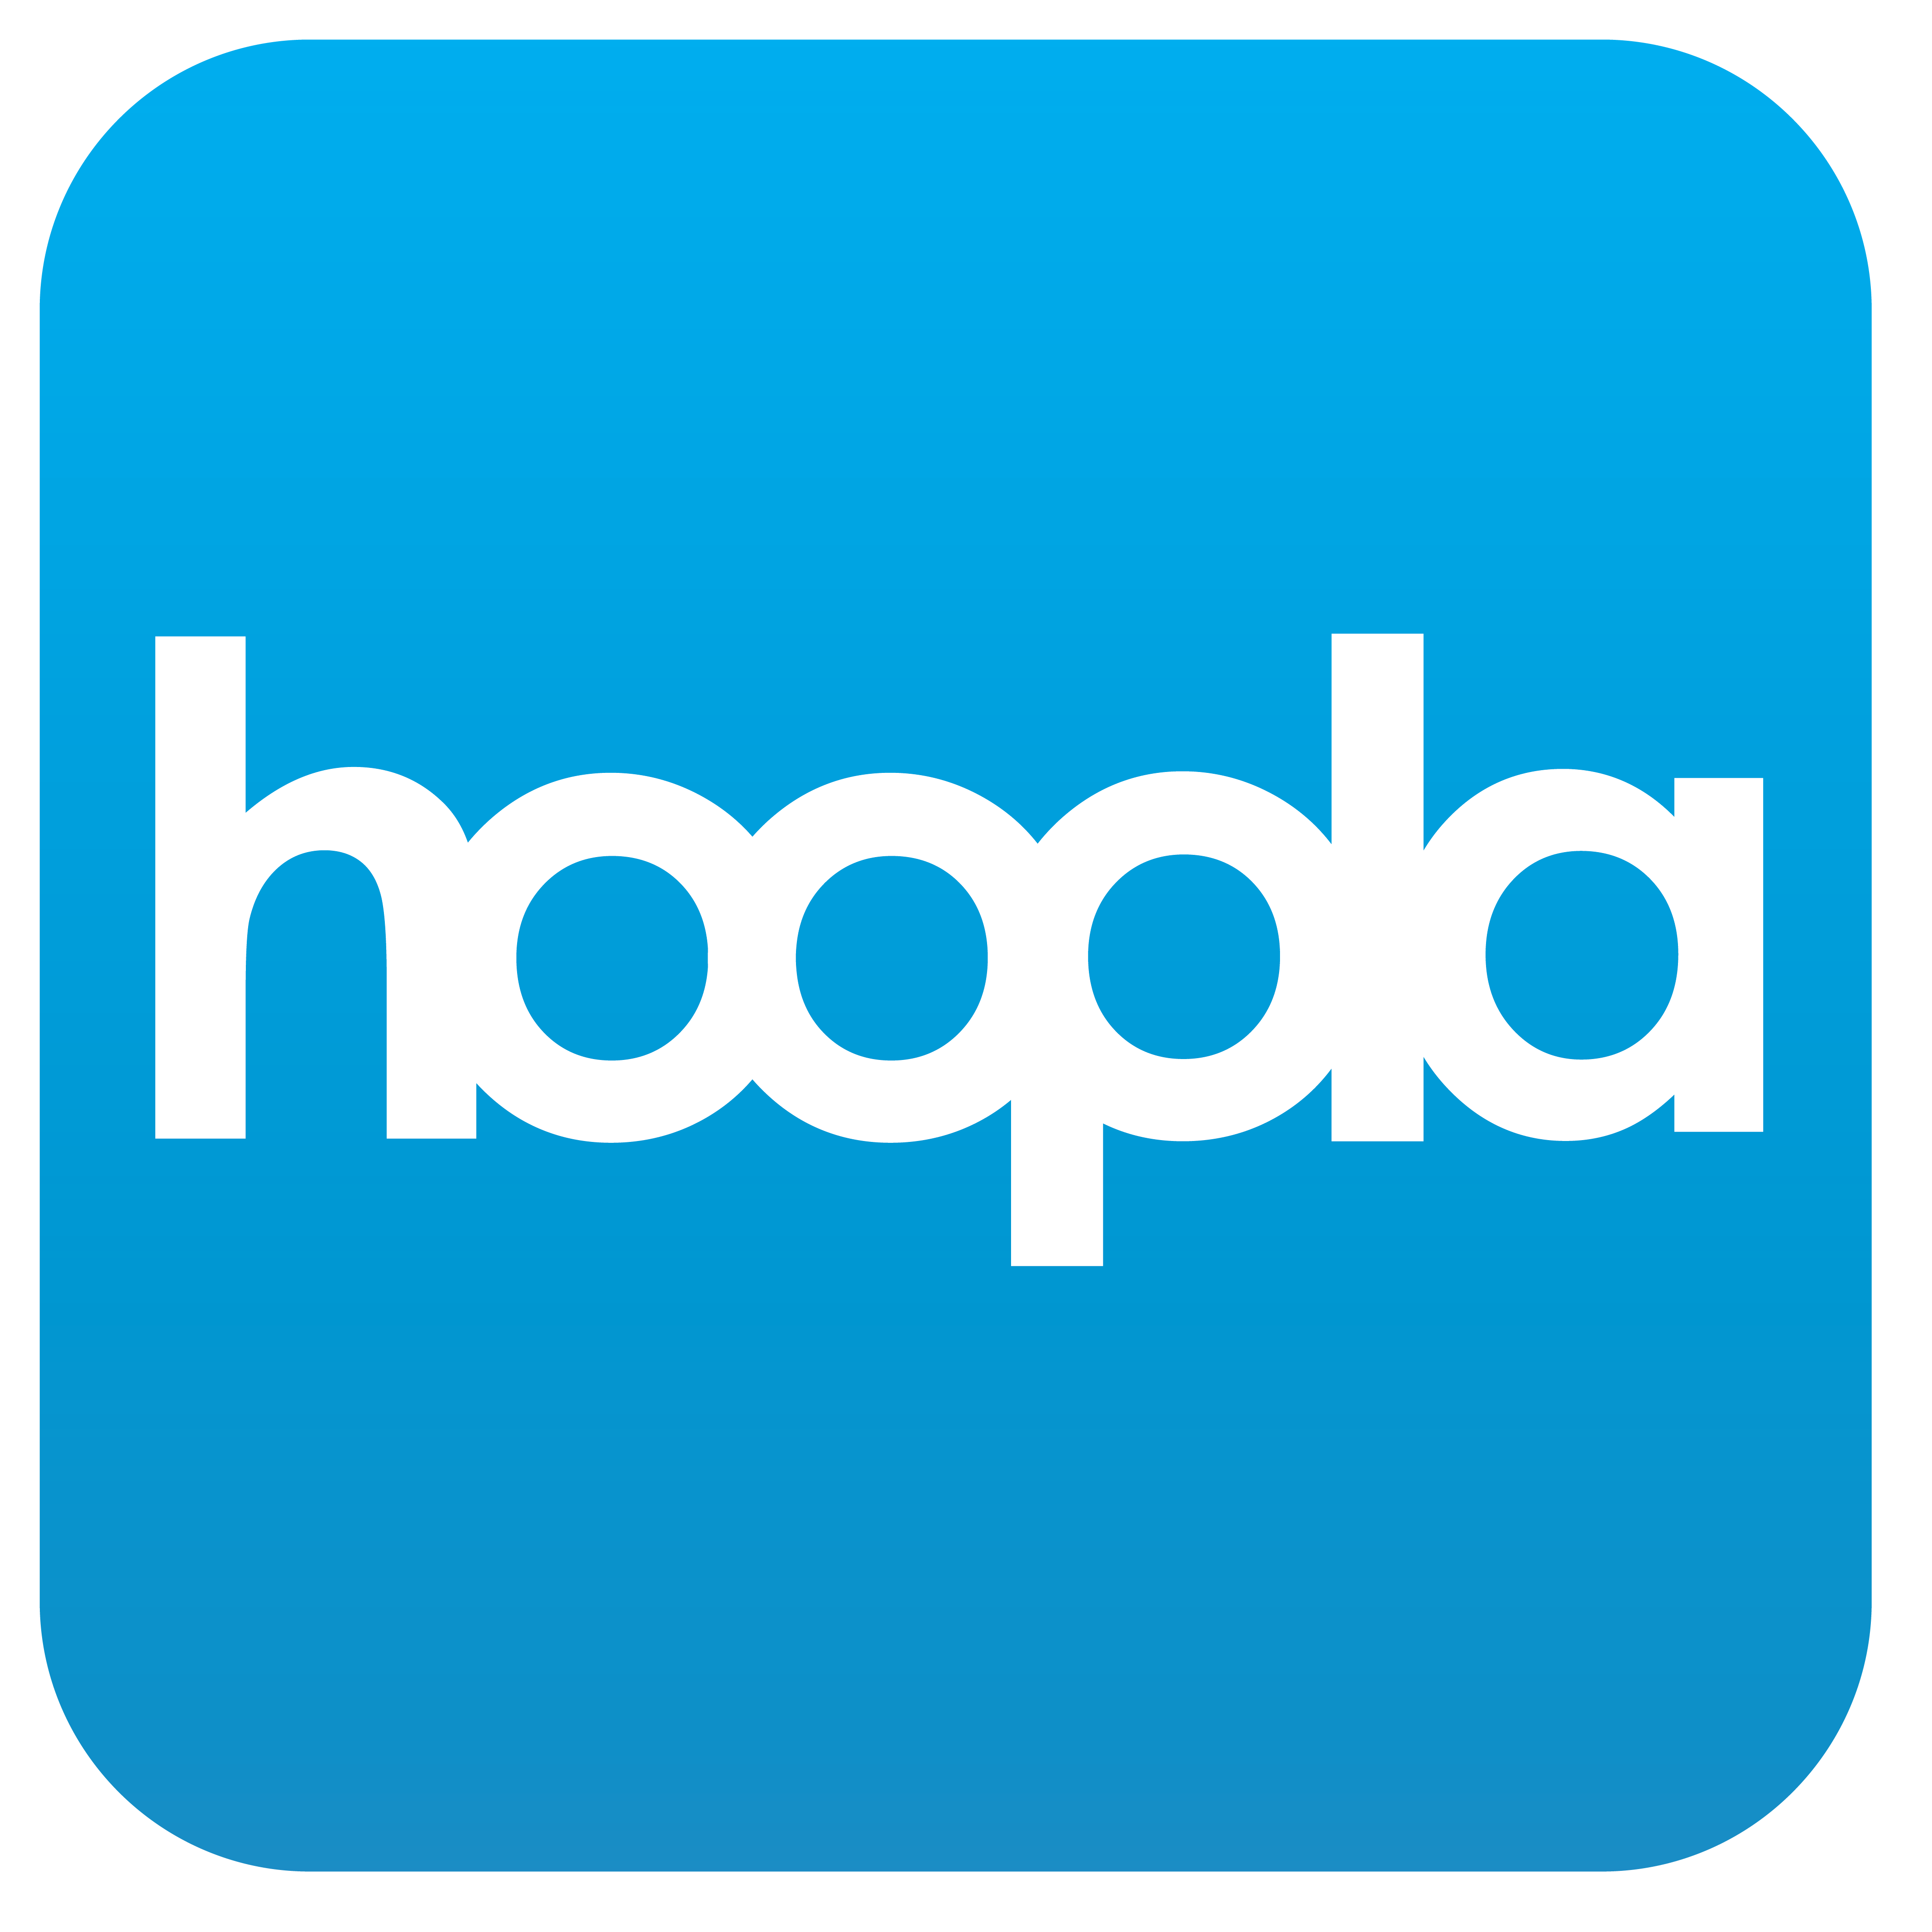 Books, Movies, and more available through Hoopla